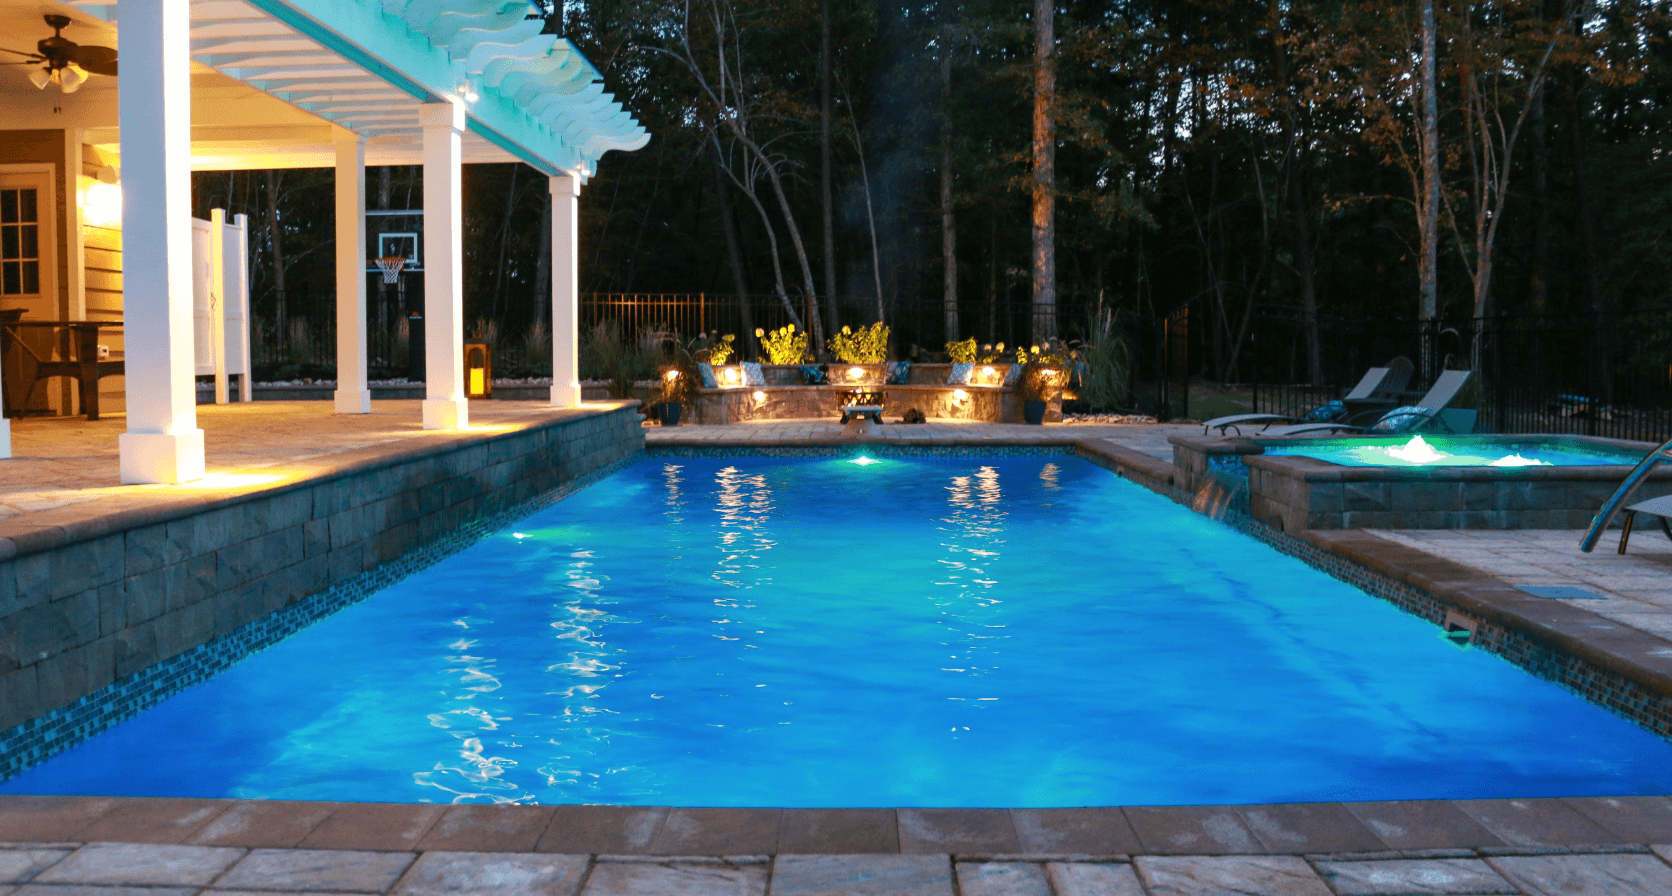 What Are the Best Fiberglass Pool Shapes?